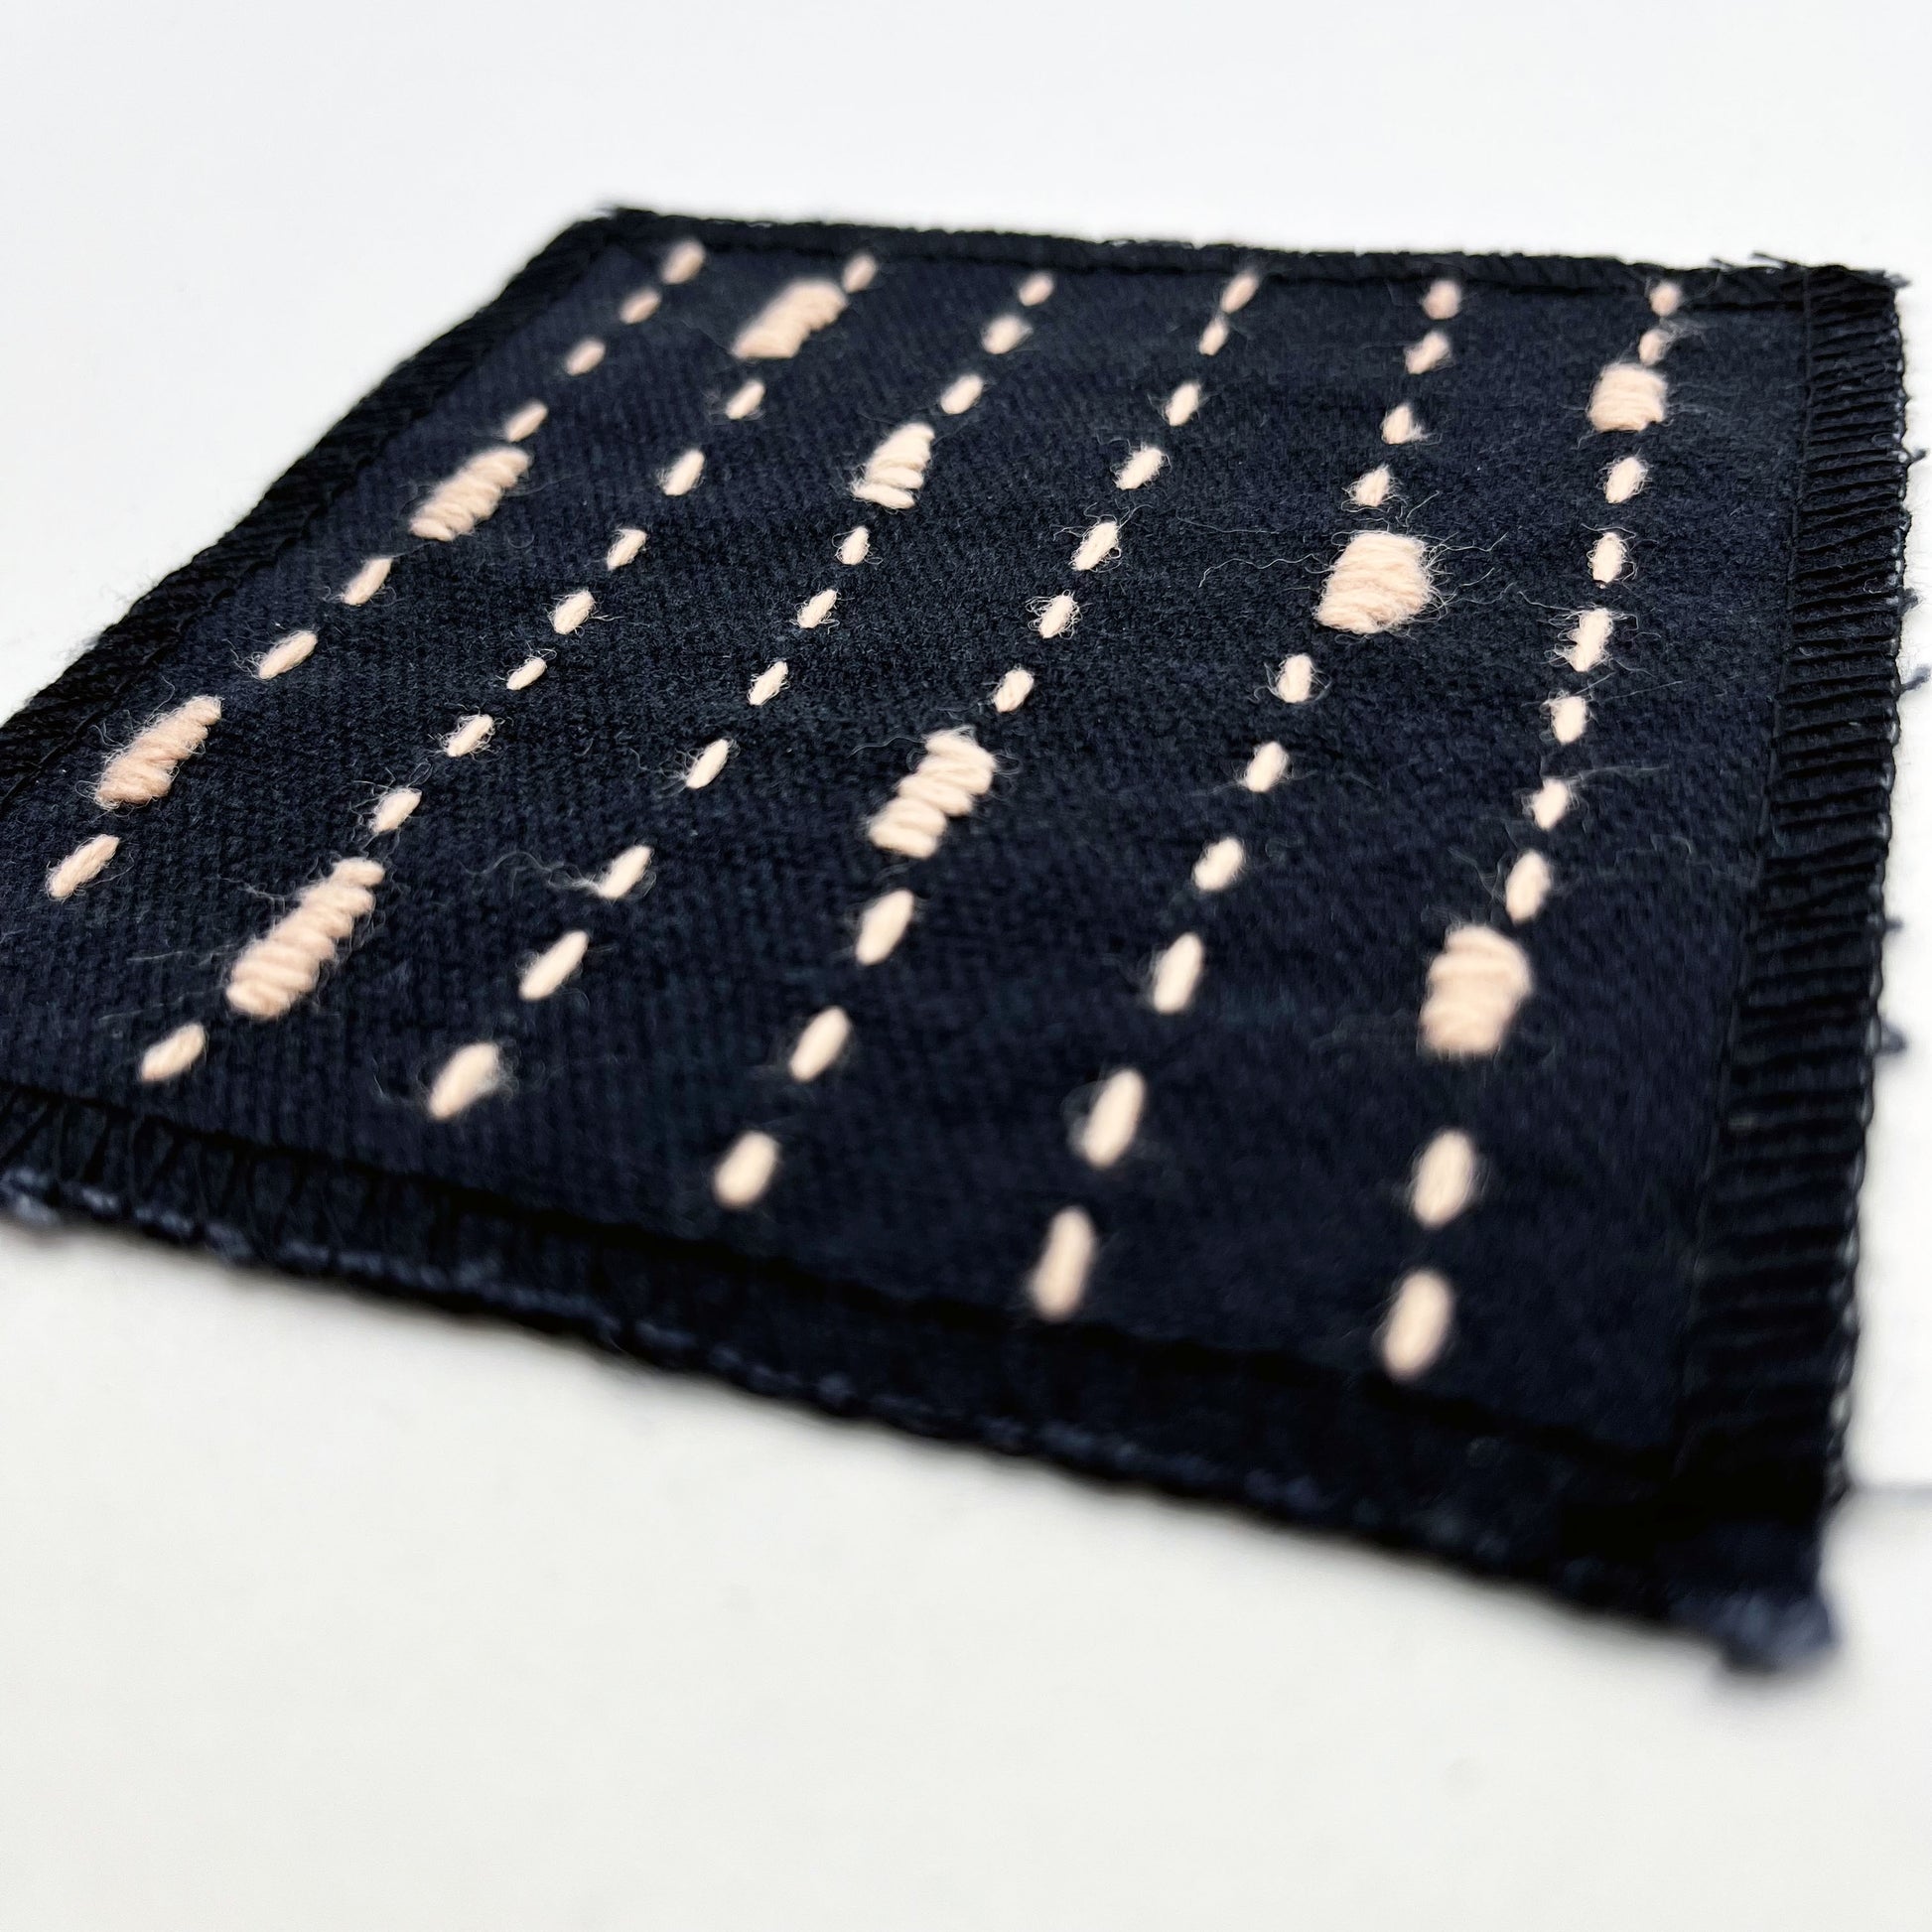 a close up angled view of a square patch made out of black canvas, handstitched with peach running stitches with randomly placed small rectangles made of stitches running the other direction, with overlocked edges, on a white background